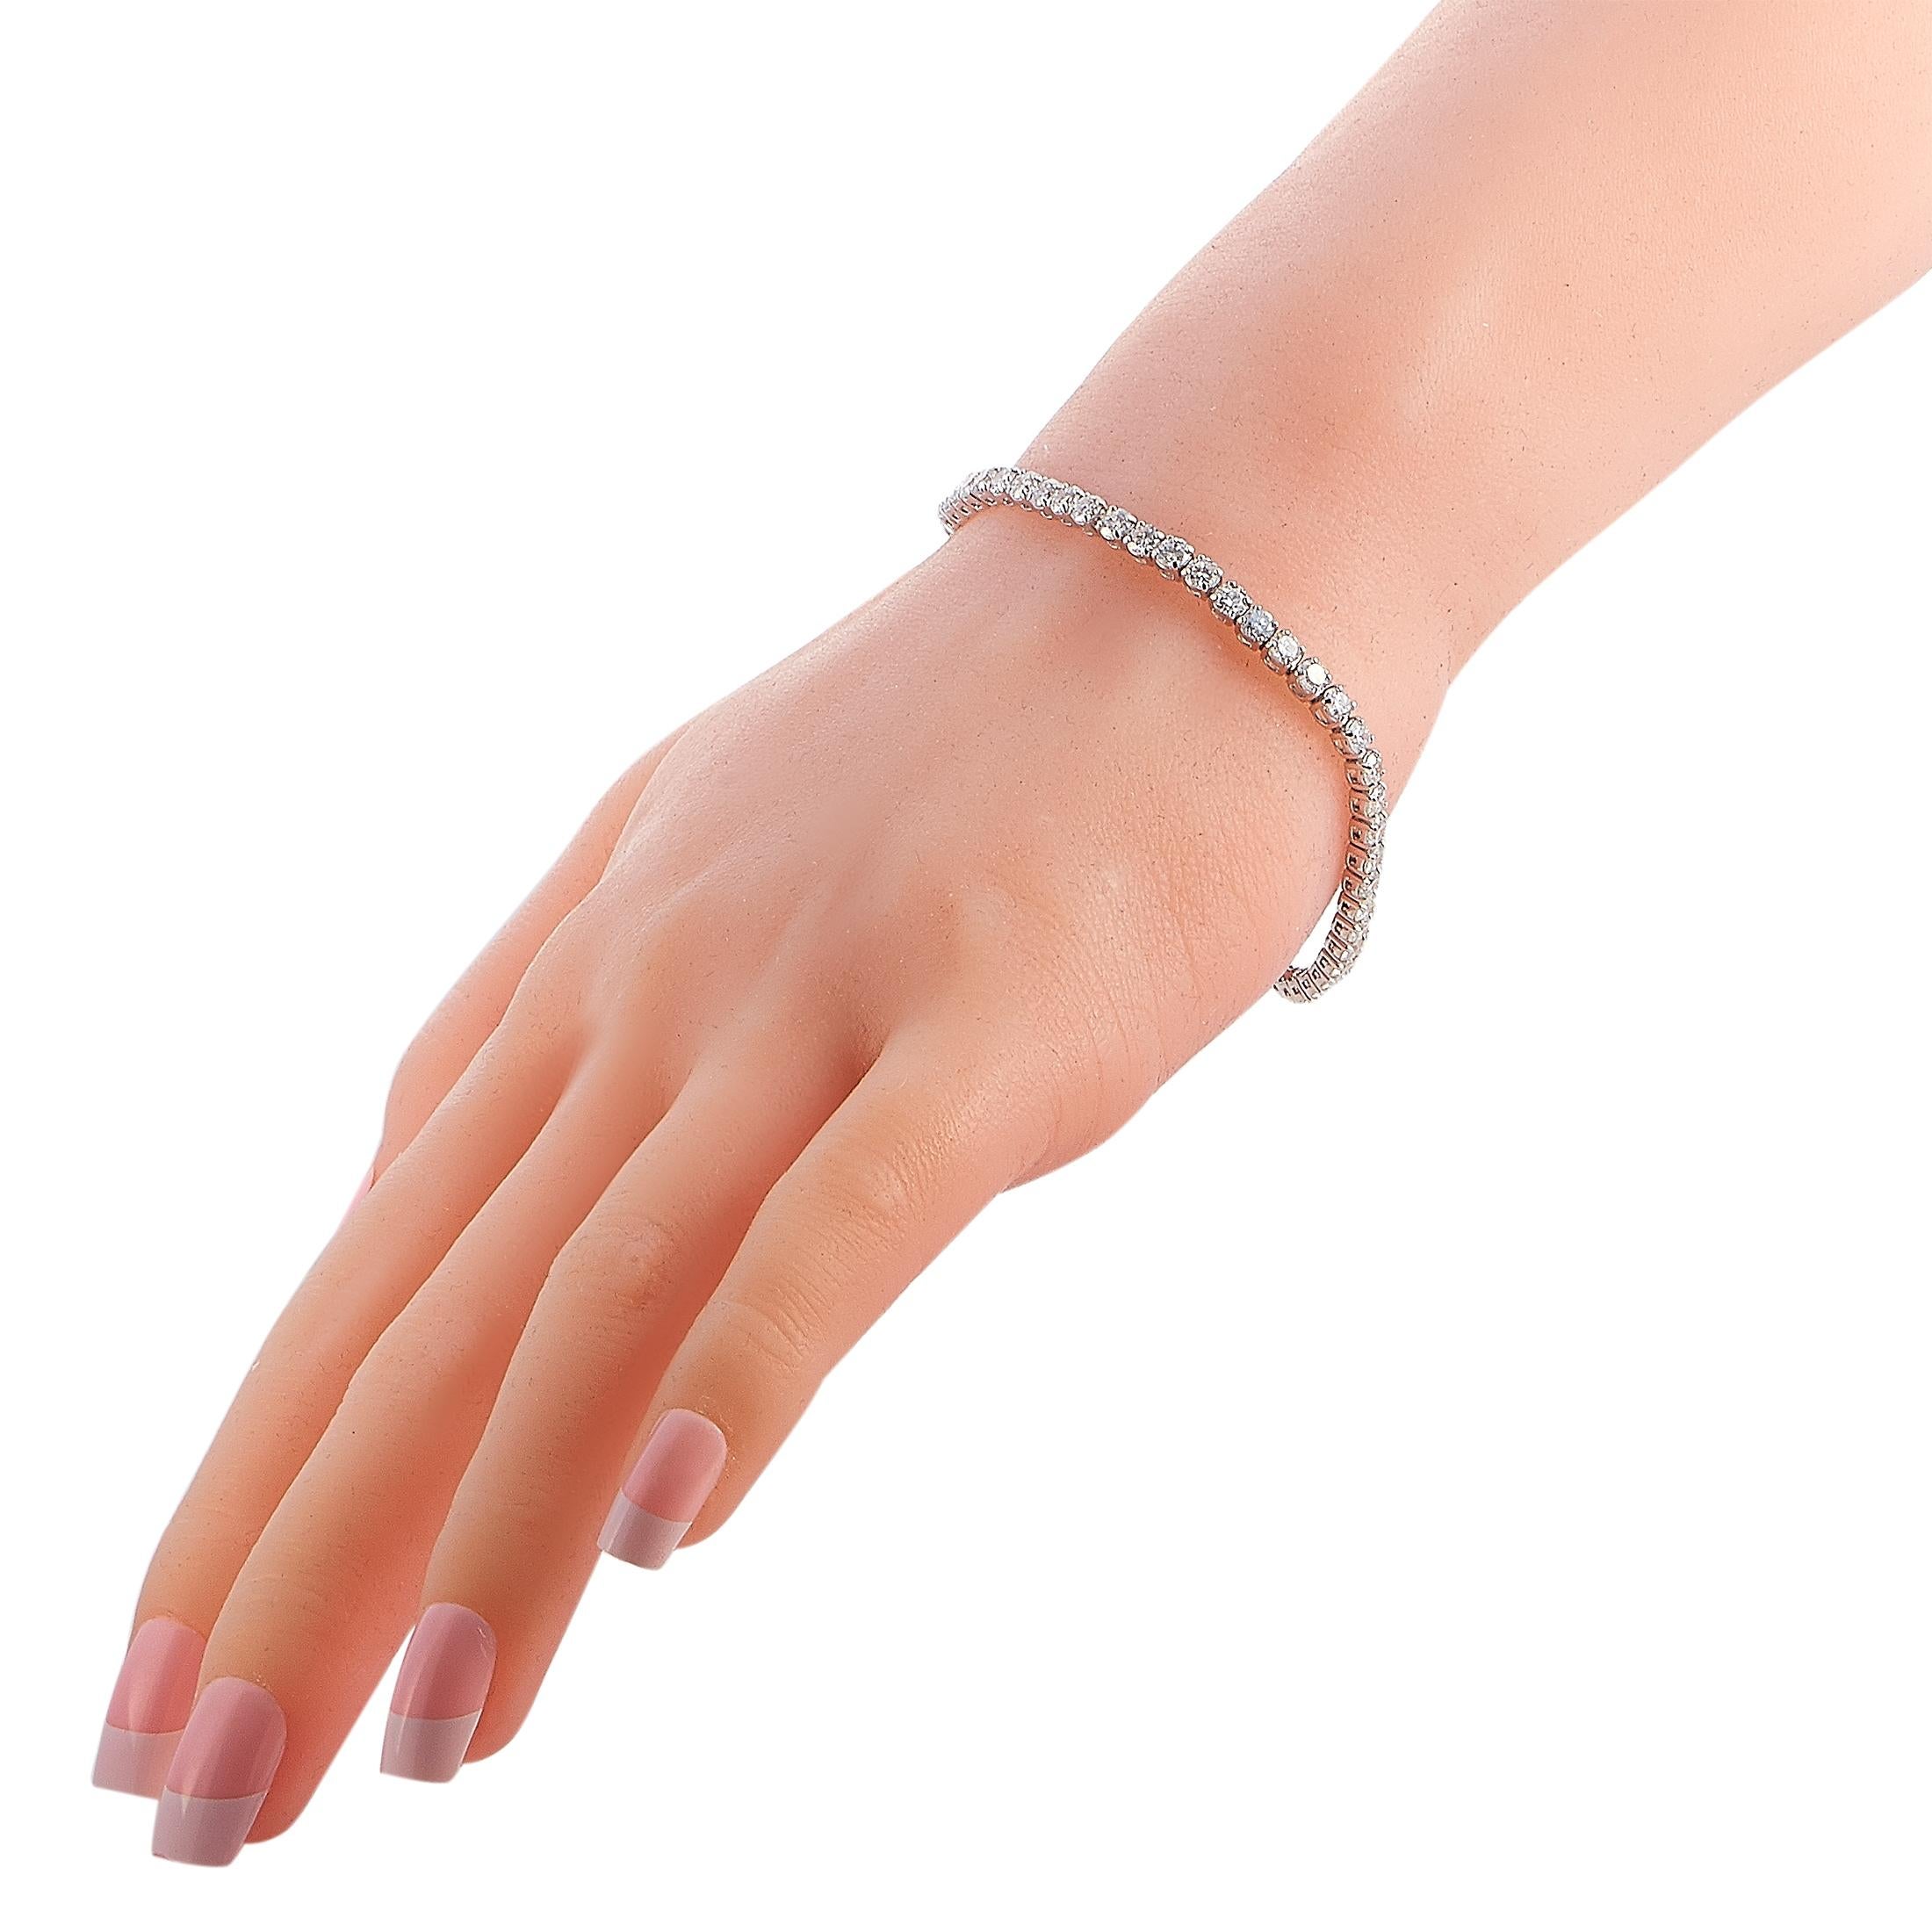 This LB Exclusive tennis bracelet is made out of 14K white gold and diamonds that total 7.23 carats. The bracelet weighs 10 grams and measures 7.50” in length.

Offered in brand new condition, this jewelry piece includes a gift box.